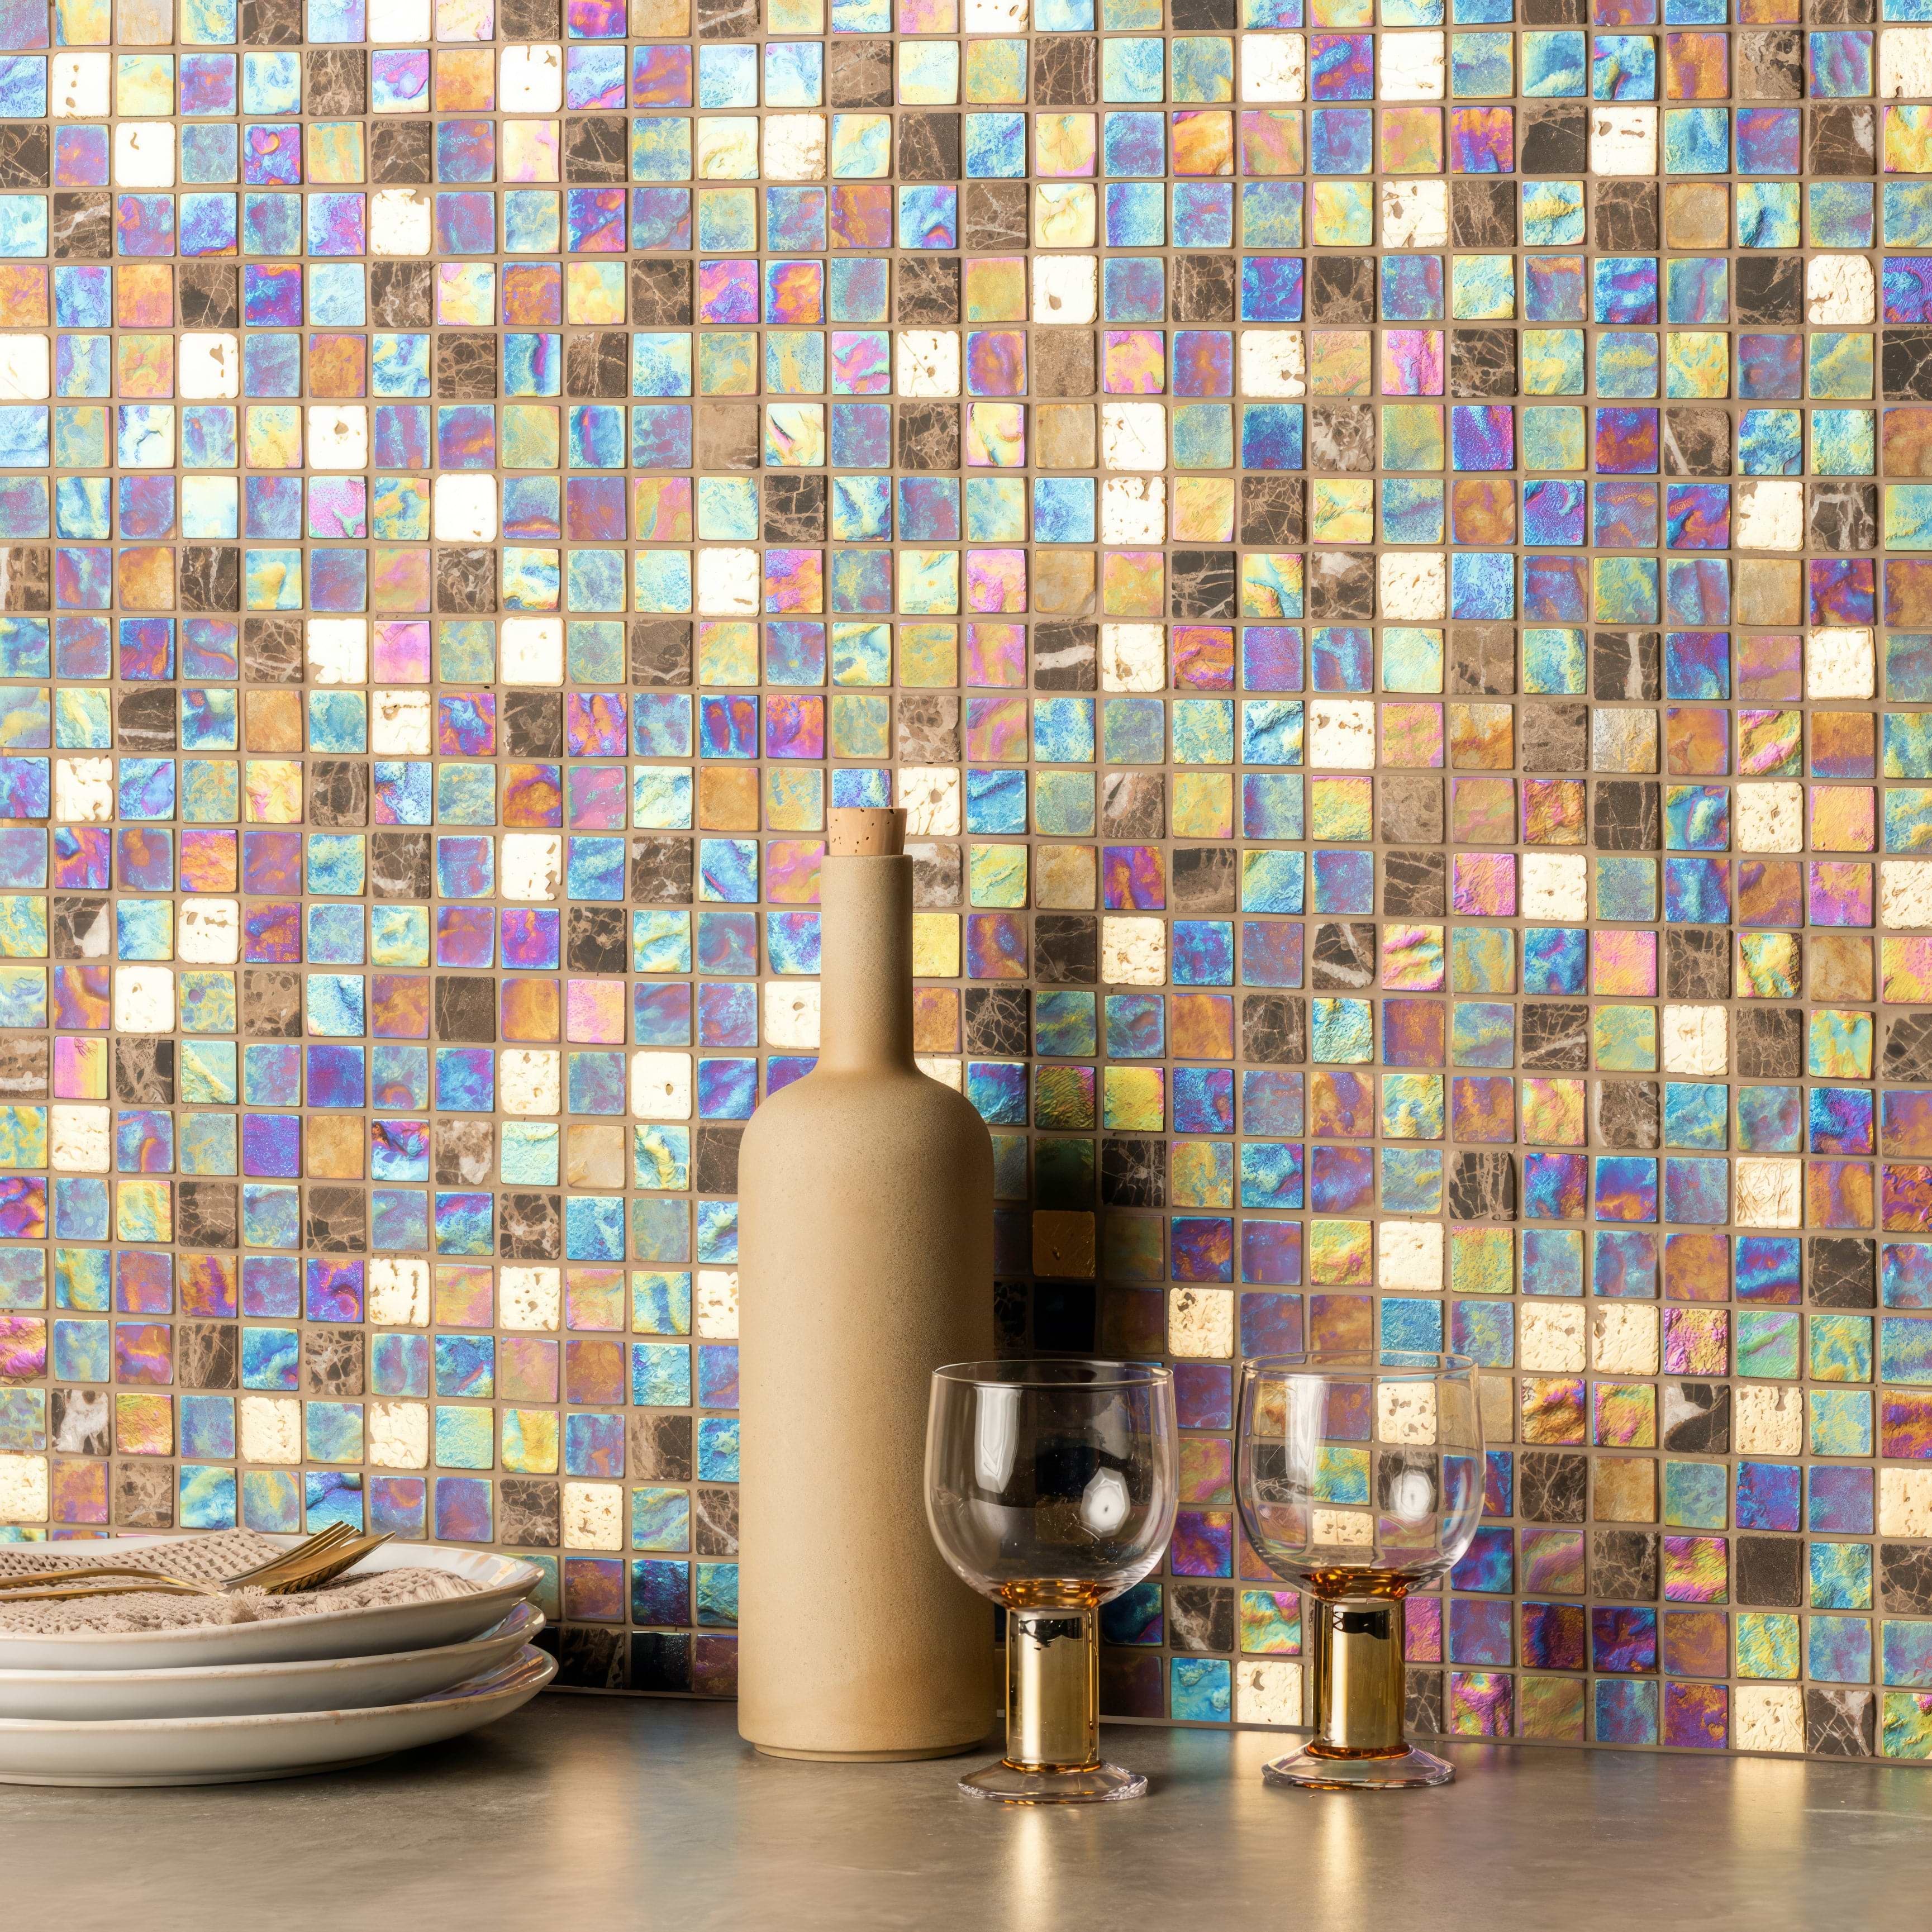 Mellow Therapy Glass Mosaic - Hyperion Tiles